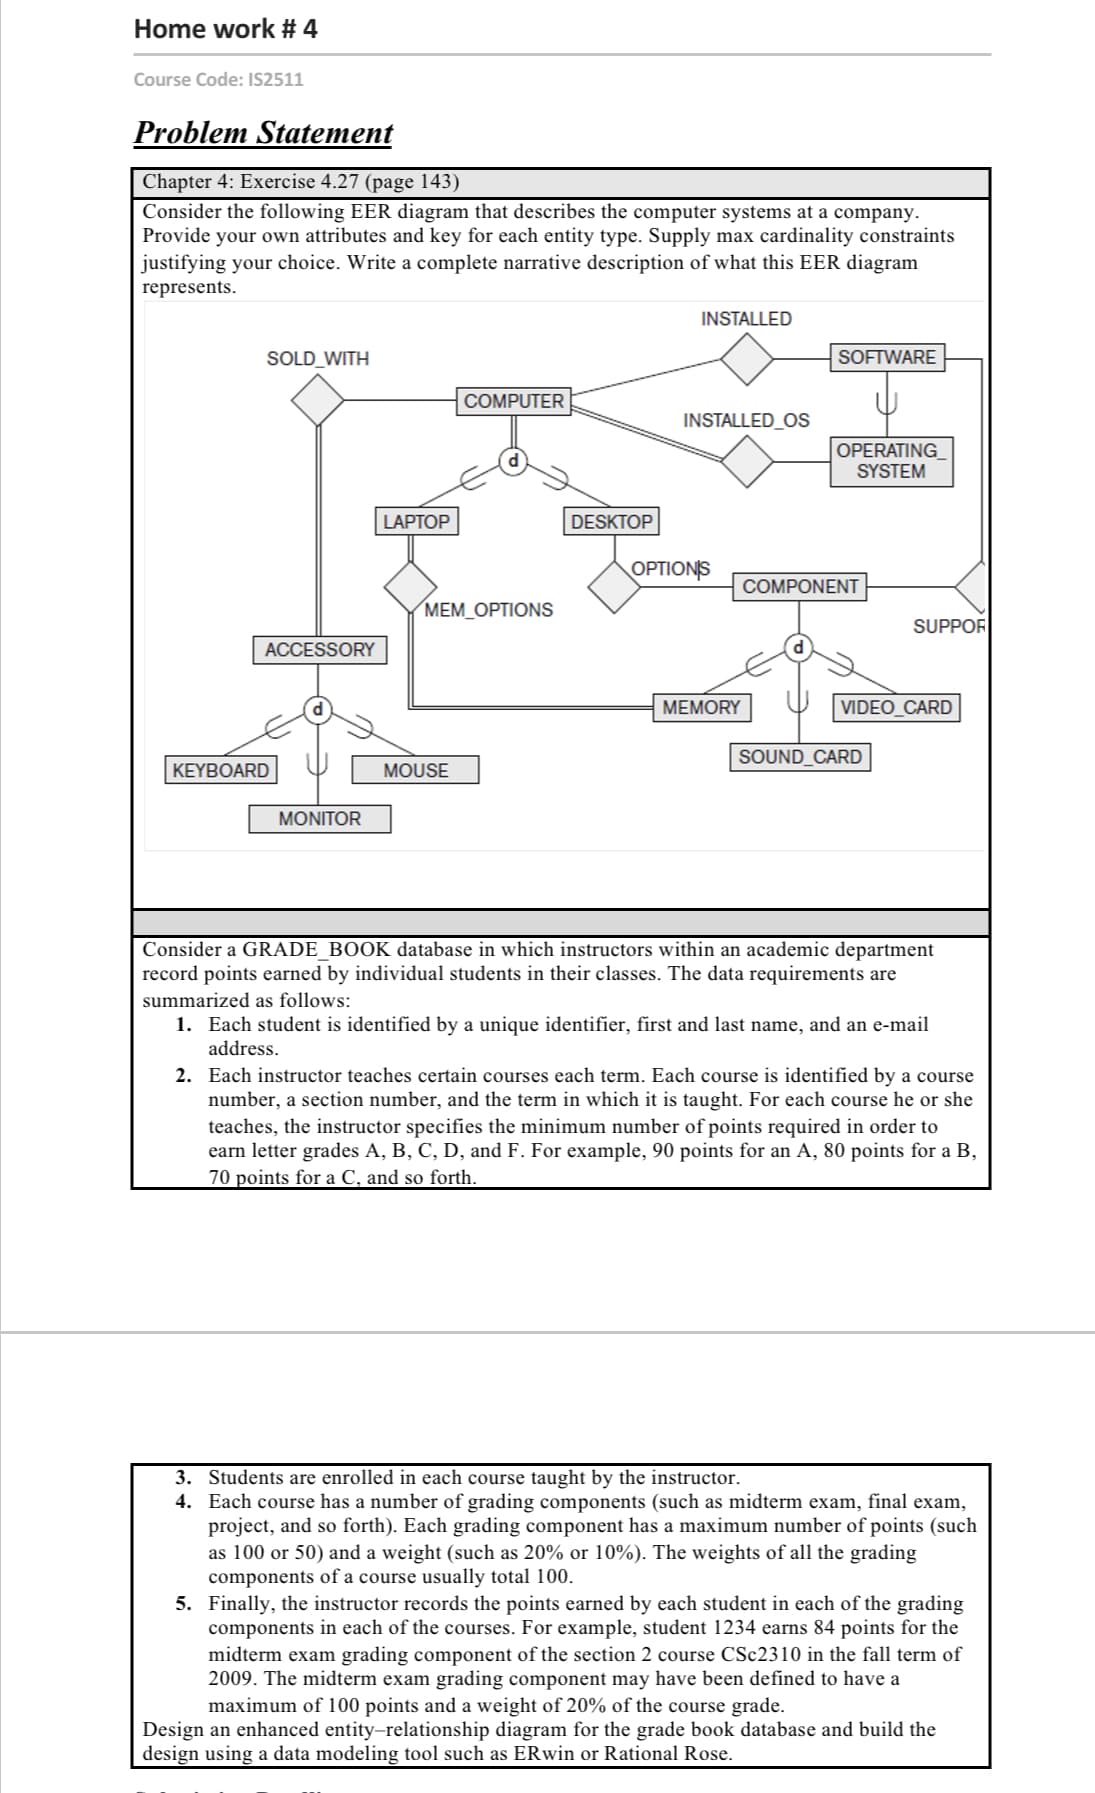 Home work # 4
Course Code: IS2511
Problem Statement
Chapter 4: Exercise 4.27 (page 143)
Consider the following EER diagram that describes the computer systems at a company.
Provide your own attributes and key for each entity type. Supply max cardinality constraints
justifying your choice. Write a complete narrative description of what this EER diagram
represents.
INSTALLED
SOLD_WITH
SOFTWARE
COMPUTER
INSTALLED_OS
OPERATING
SYSTEM
LAPTOP
DESKTOP
OPTIONS
COMPONENT
МЕM_OРTIONS
SUPPOR
ACCESSORY
MEMORY
VIDEO_CARD
SOUND_CARD
KEYBOARD
MOUSE
MONITOR
Consider a GRADE_BOOK database in which instructors within an academic department
record points earned by individual students in their classes. The data requirements are
summarized as follows:
1. Each student is identified by a unique identifier, first and last name, and an e-mail
address.
2. Each instructor teaches certain courses each term. Each course is identified by a course
number, a section number, and the term in which it is taught. For each course he or she
teaches, the instructor specifies the minimum number of points required in order to
earn letter grades A, B, C, D, and F. For example, 90 points for an A, 80 points for a B,
70 points for a C, and so forth.
3. Students are enrolled in each course taught by the instructor.
4. Each course has a number of grading components (such as midterm exam, final exam,
project, and so forth). Each grading component has a maximum number of points (such
as 100 or 50) and a weight (such as 20% or 10%). The weights of all the grading
components of a course usually total 100.
5. Finally, the instructor records the points earned by each student in each of the grading
components in each of the courses. For example, student 1234 earns 84 points for the
midterm exam grading component of the section 2 course CSC2310 in the fall term of
2009. The midterm exam grading component may have been defined to have a
maximum of 100 points and a weight of 20% of the course grade.
Design an enhanced entity-relationship diagram for the grade book database and build the
design using a data modeling tool such as ERwin or Rational Rose.
